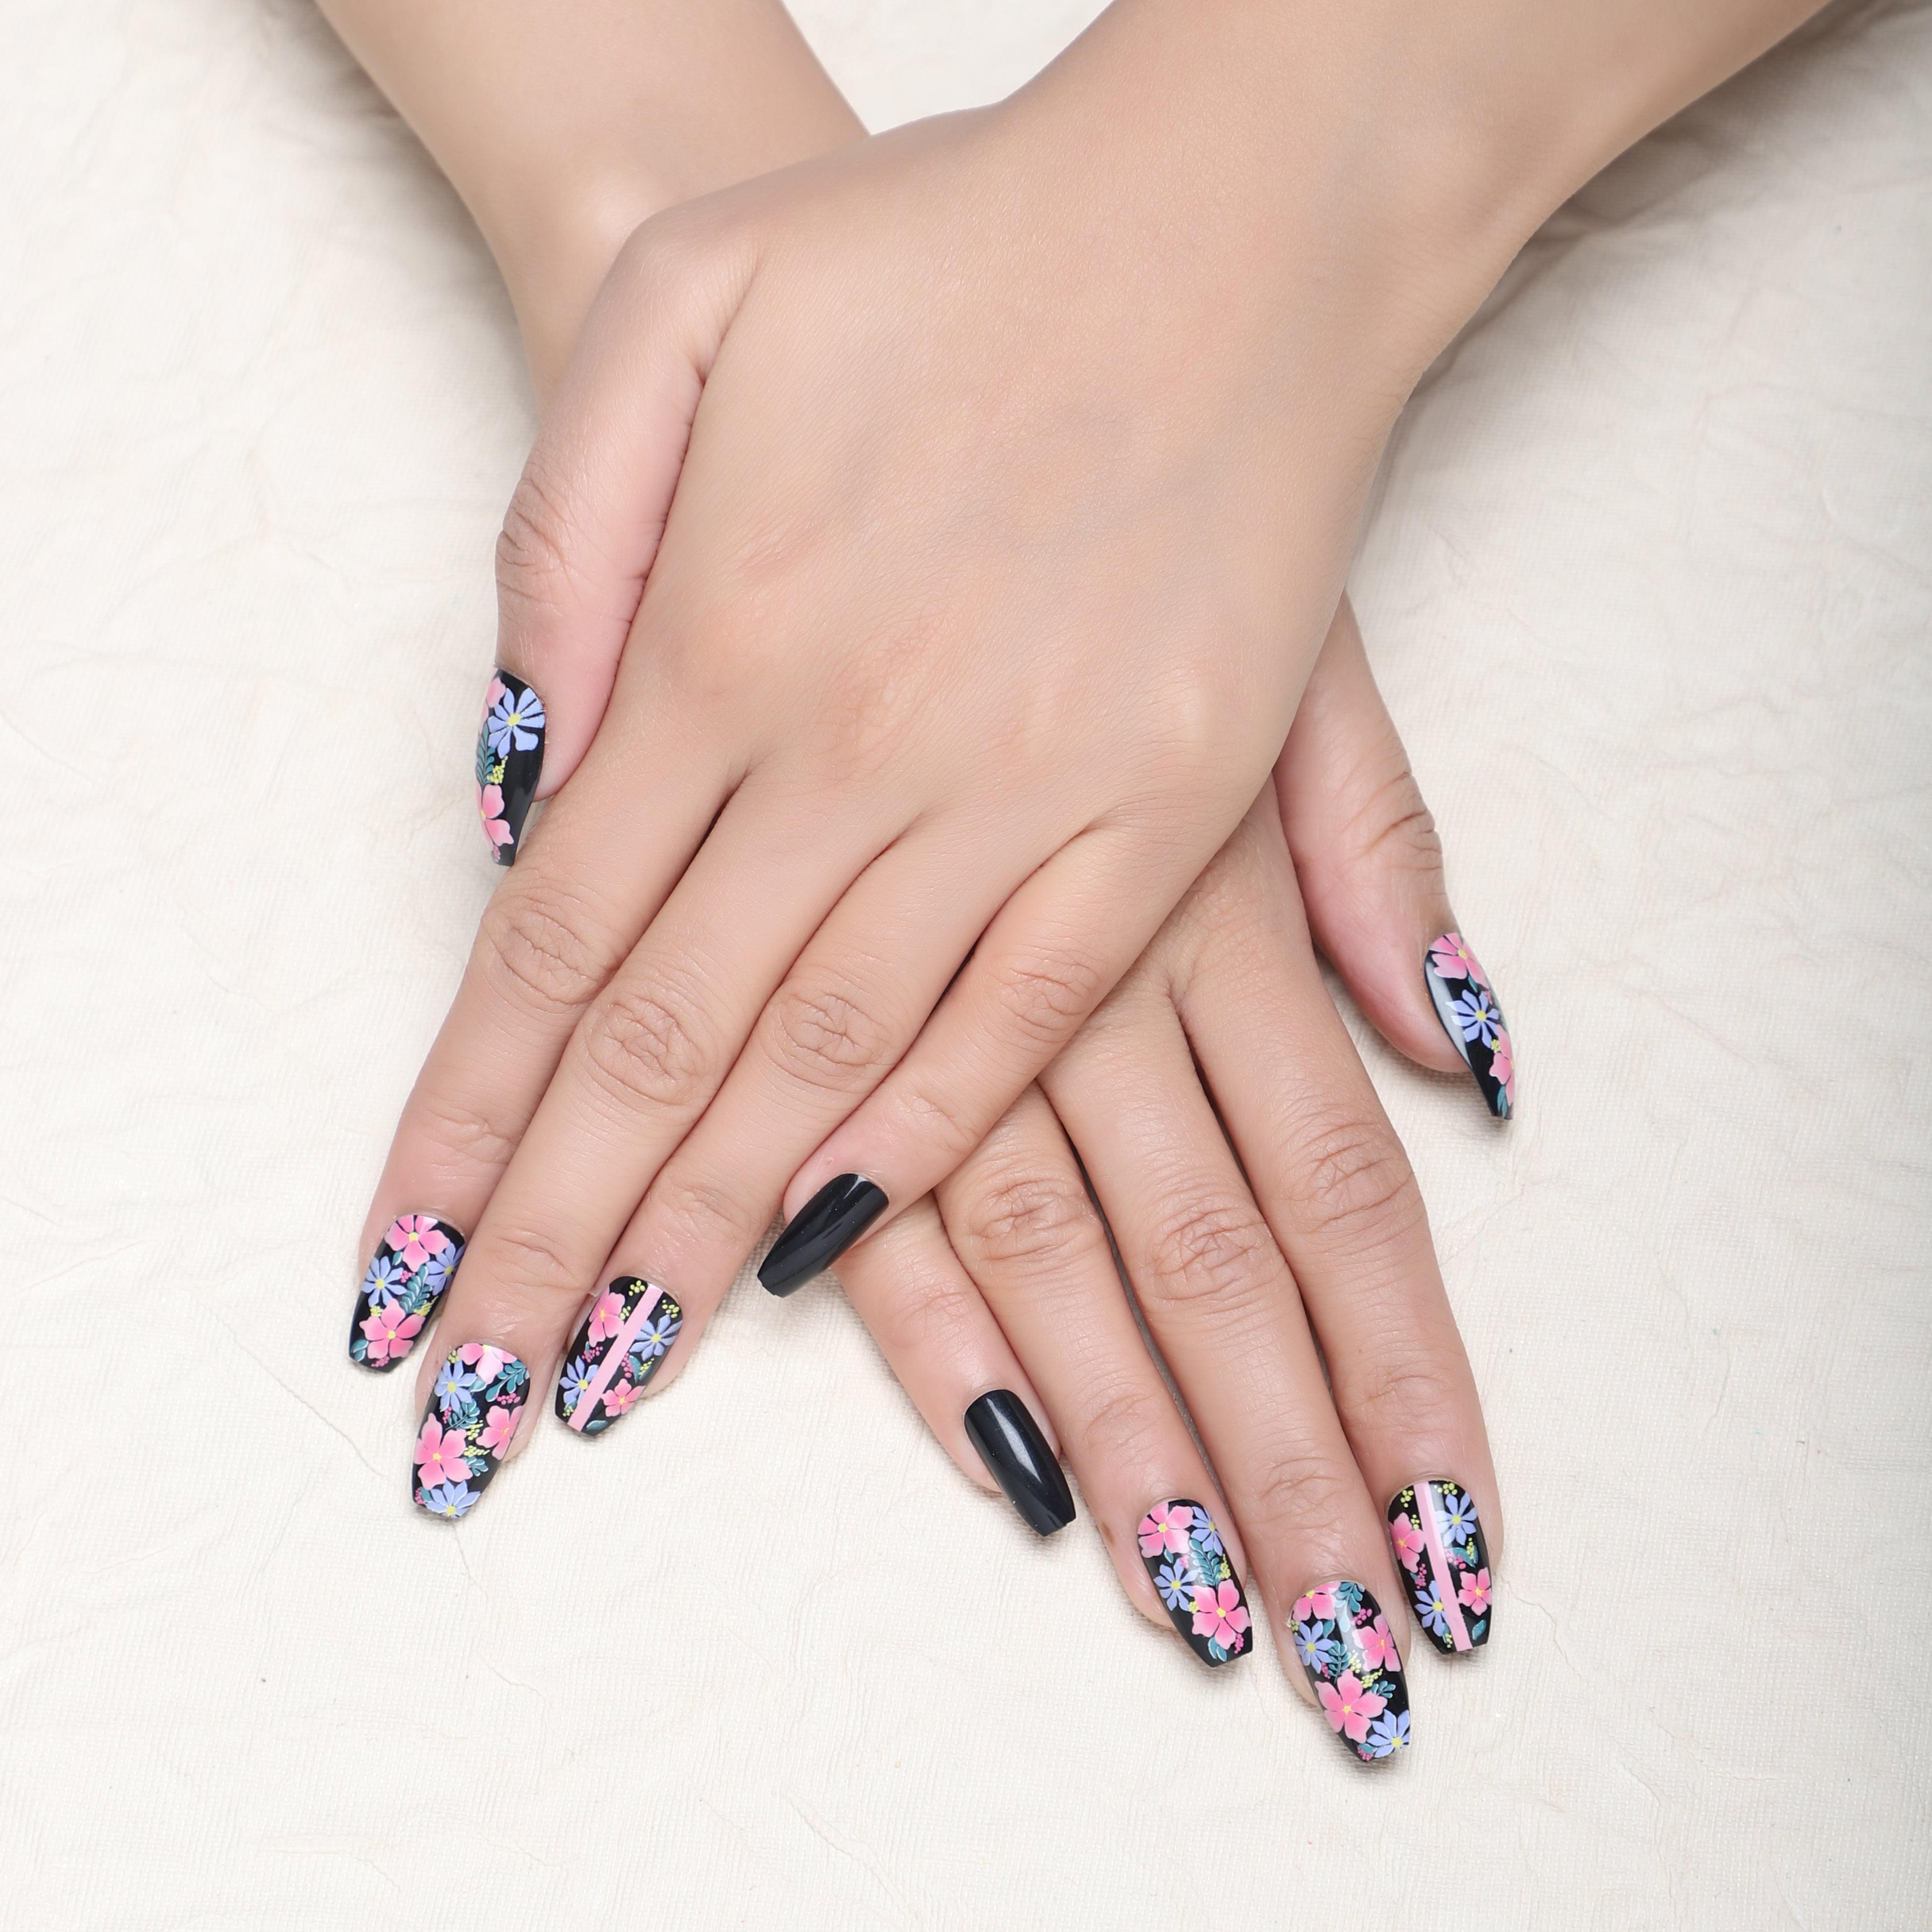 Lick Nail Glossy Finish Black And White With Floral Design Ballerina Shape Press On Nails Pack Of 28 Pcs